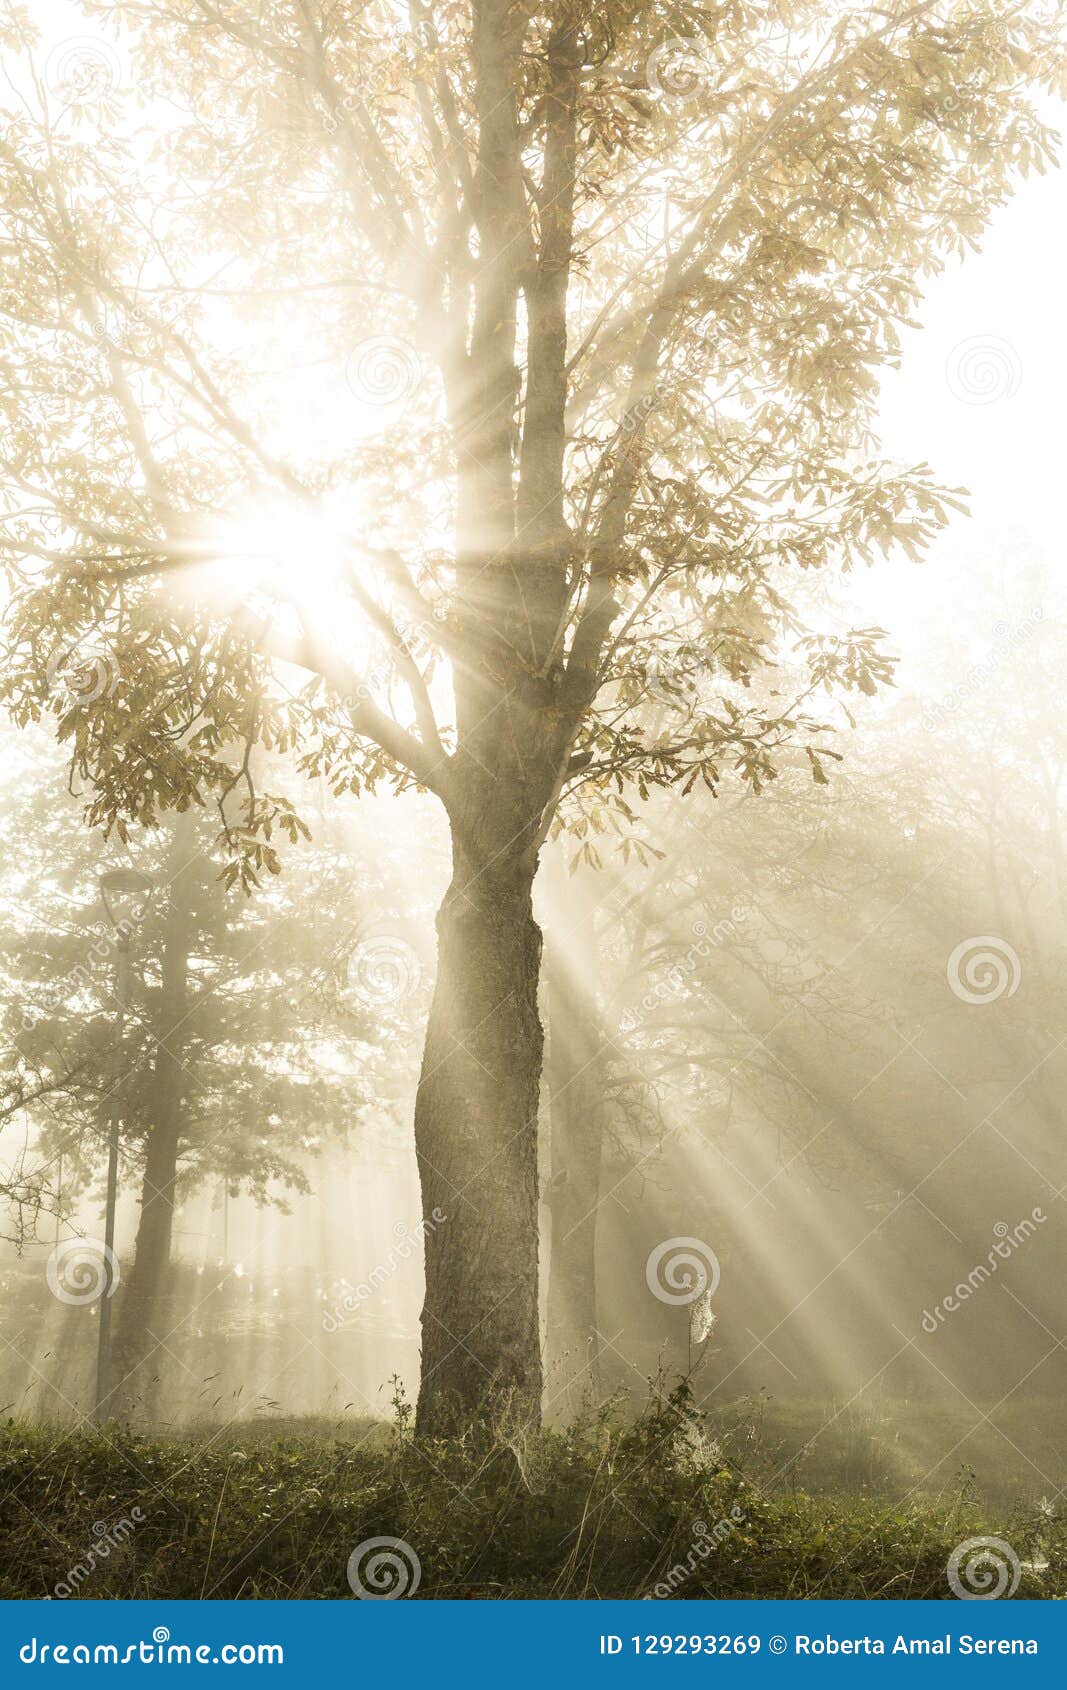 Rays of Light Filter through the Fog and Branches of a Tree Stock Image